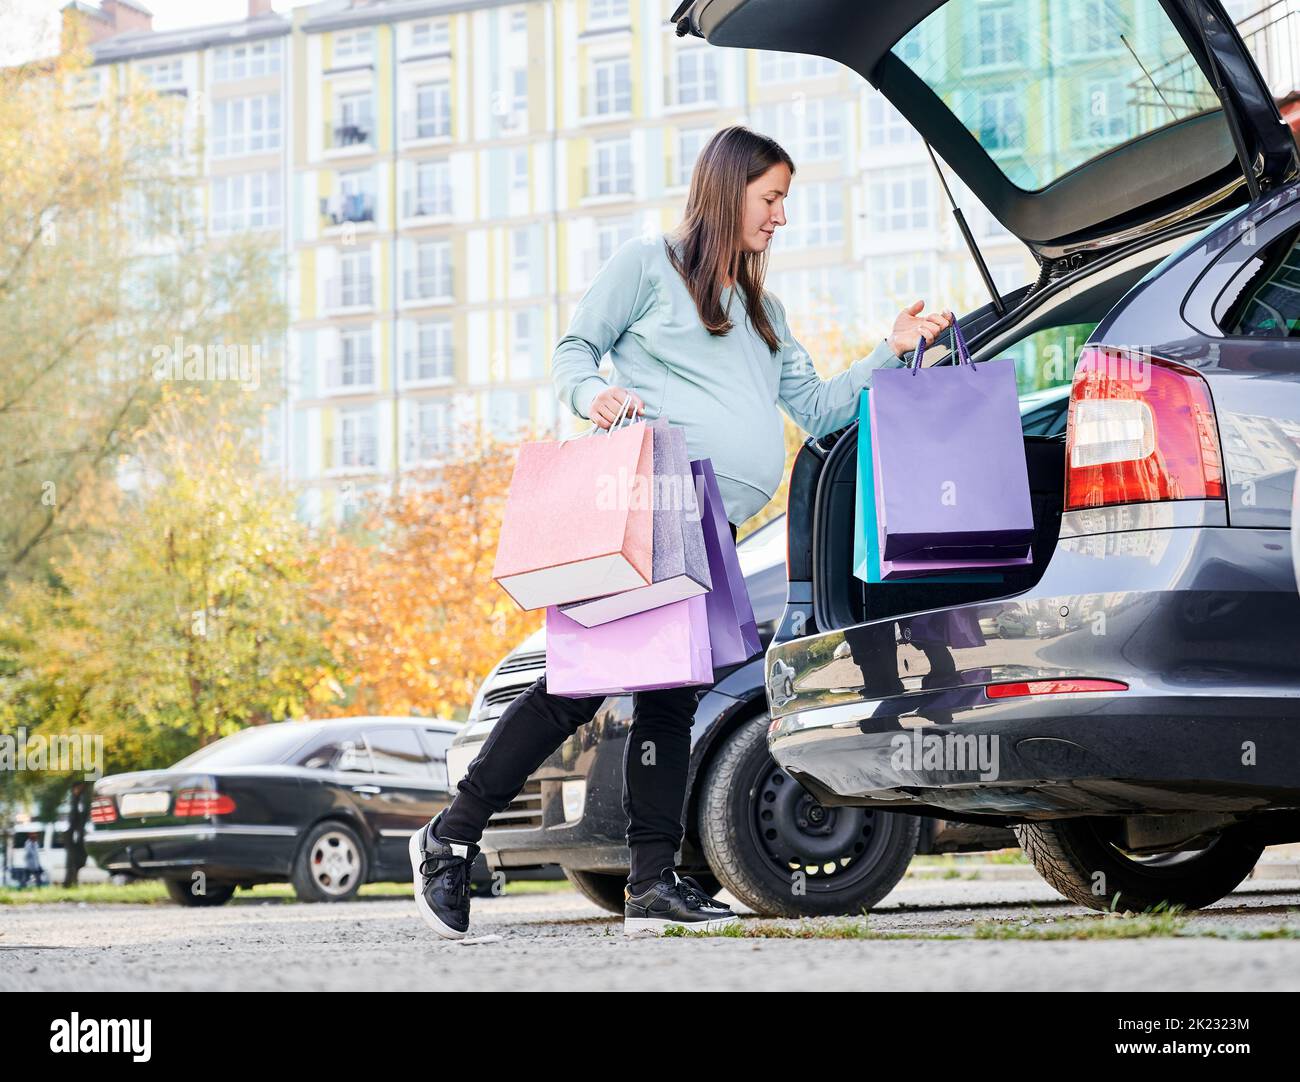 Caucasian woman with belly puting shopping bags in vehicle trunk enjoying maternity and parenthood in awaiting mode. Pregnant female with purchase preparing for baby birth during weekend in city. Stock Photo